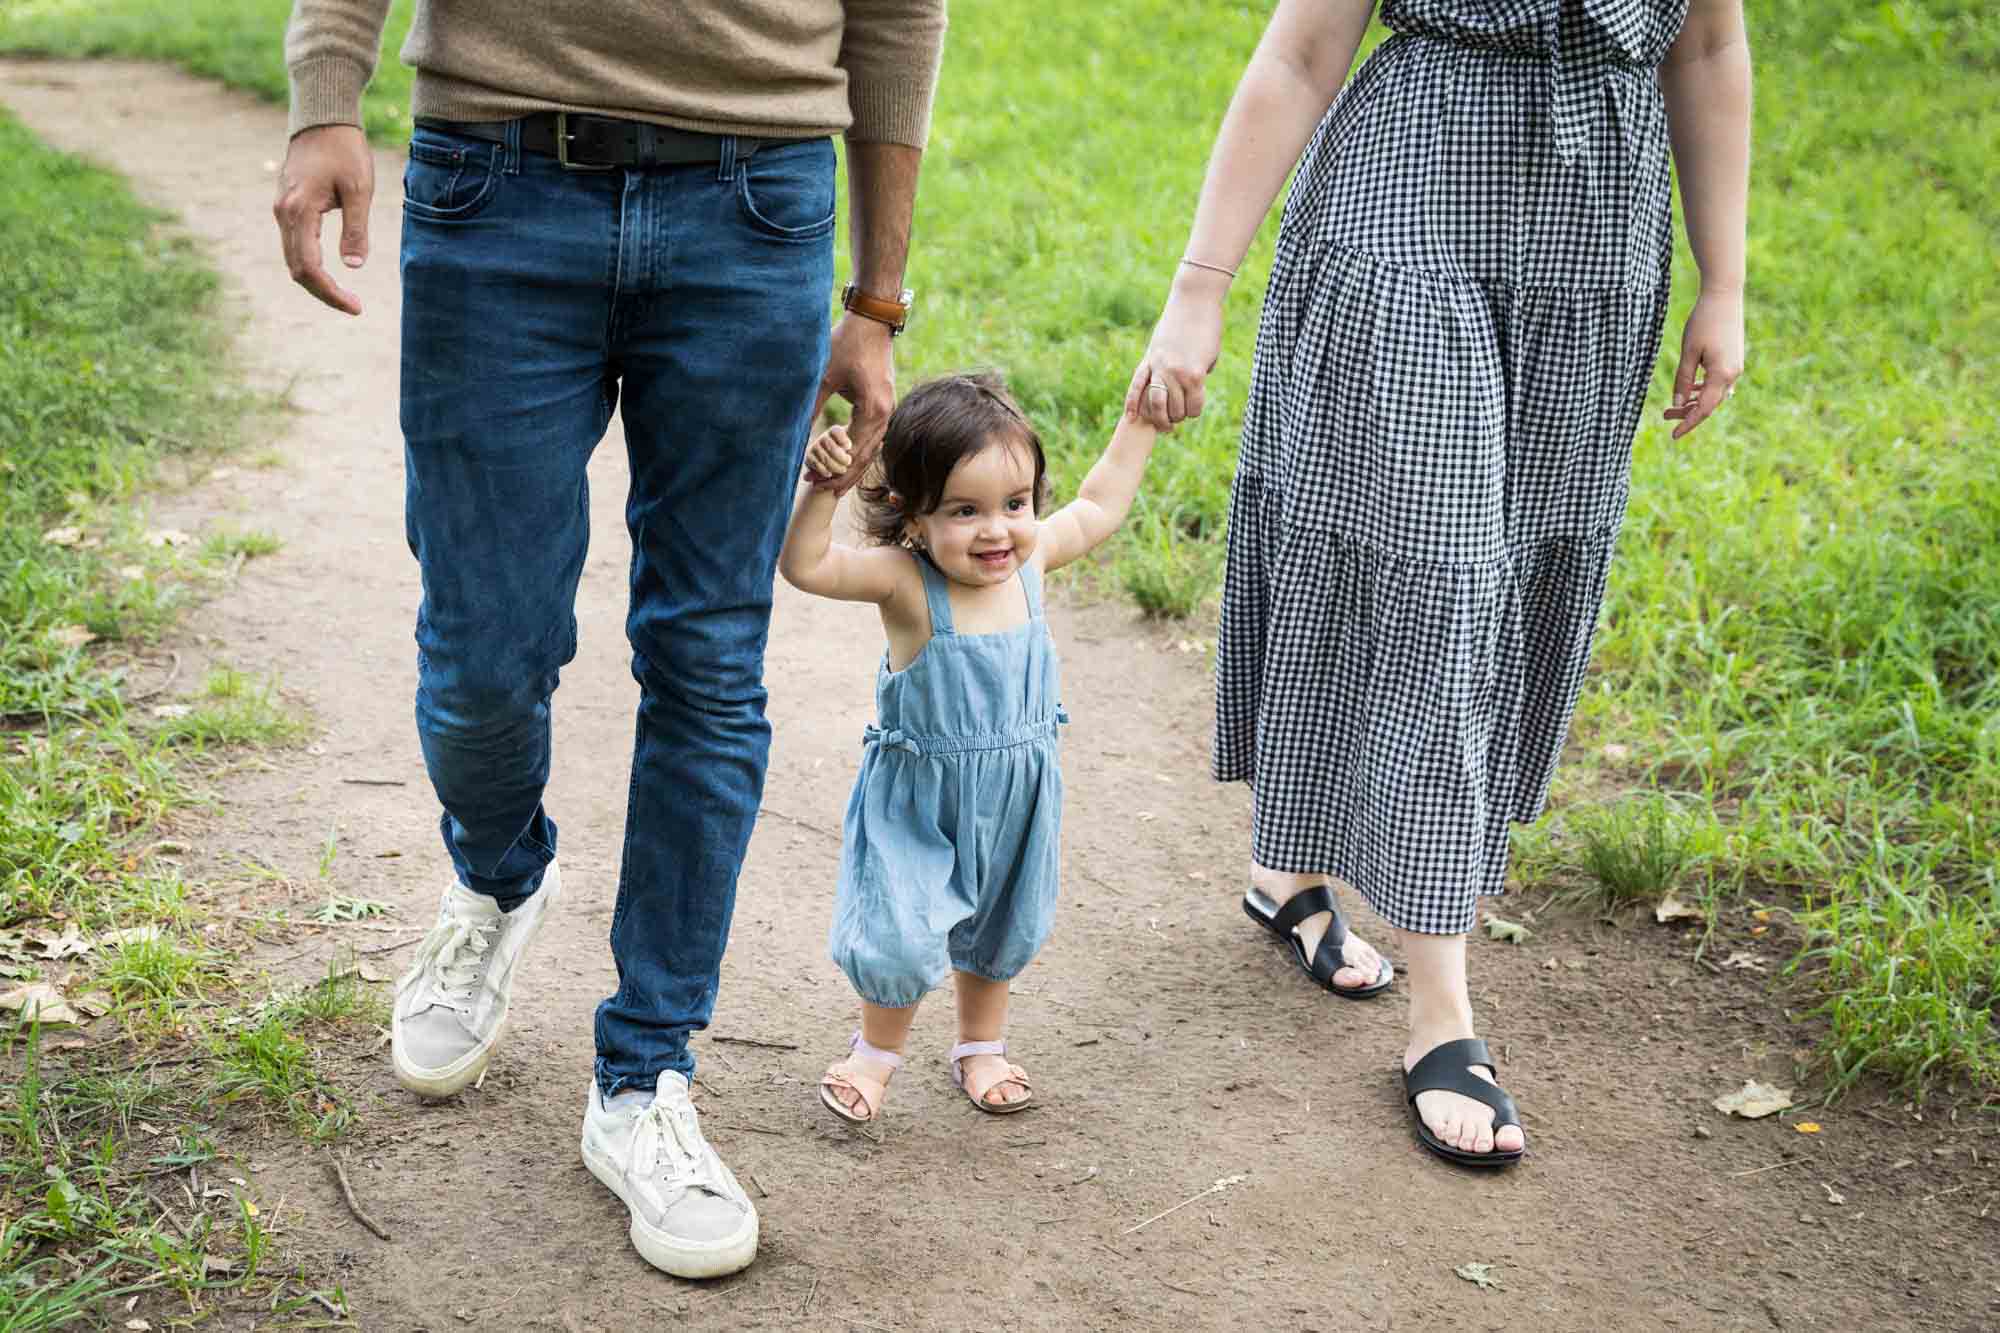 Toddler holding hands of parents while walking during a Fort Green Park family photo shoot